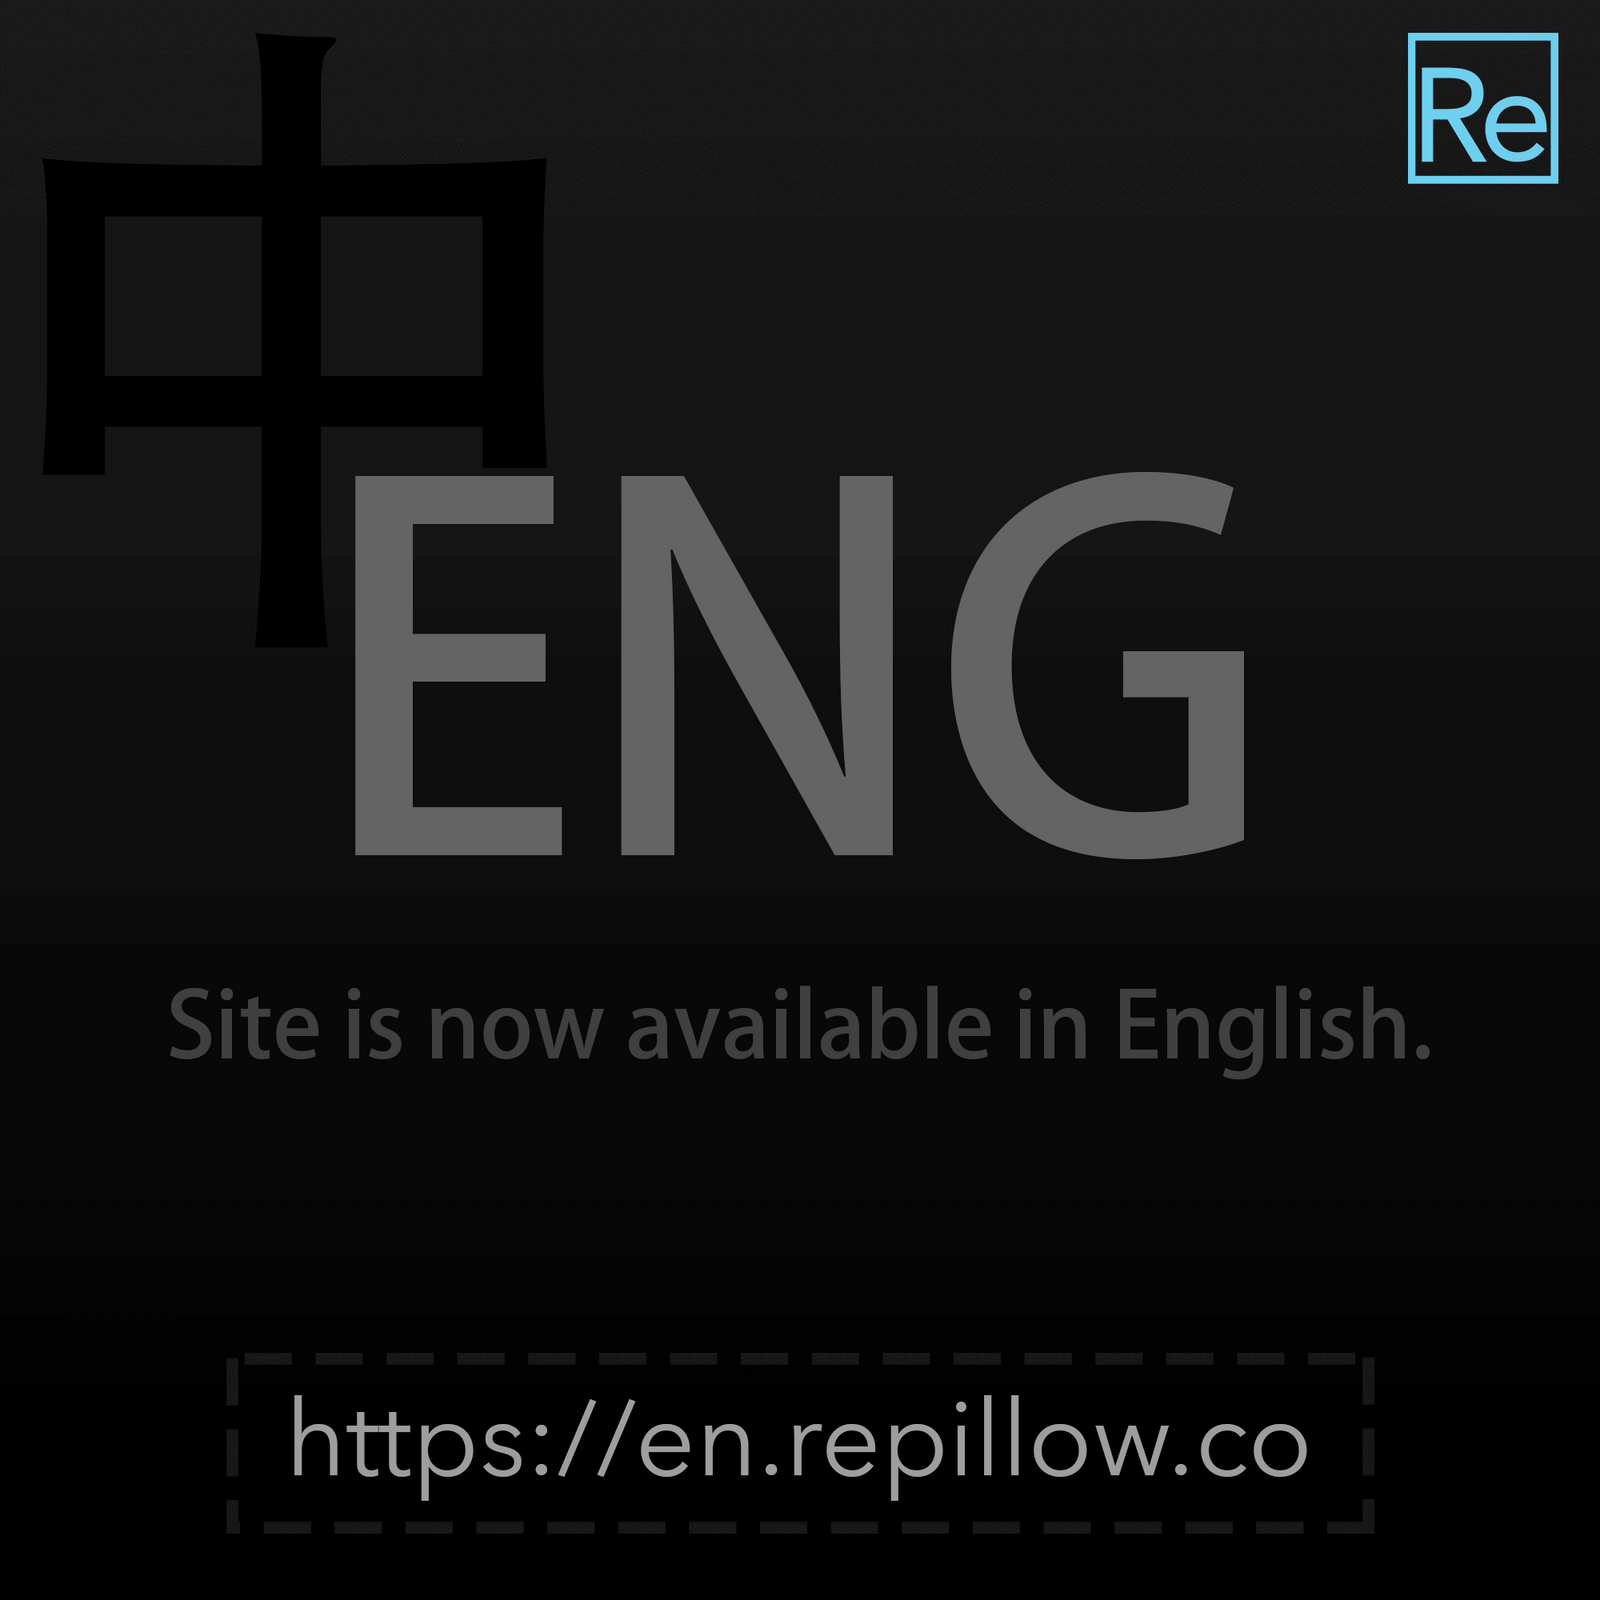 Re Pillow Co. is now in English